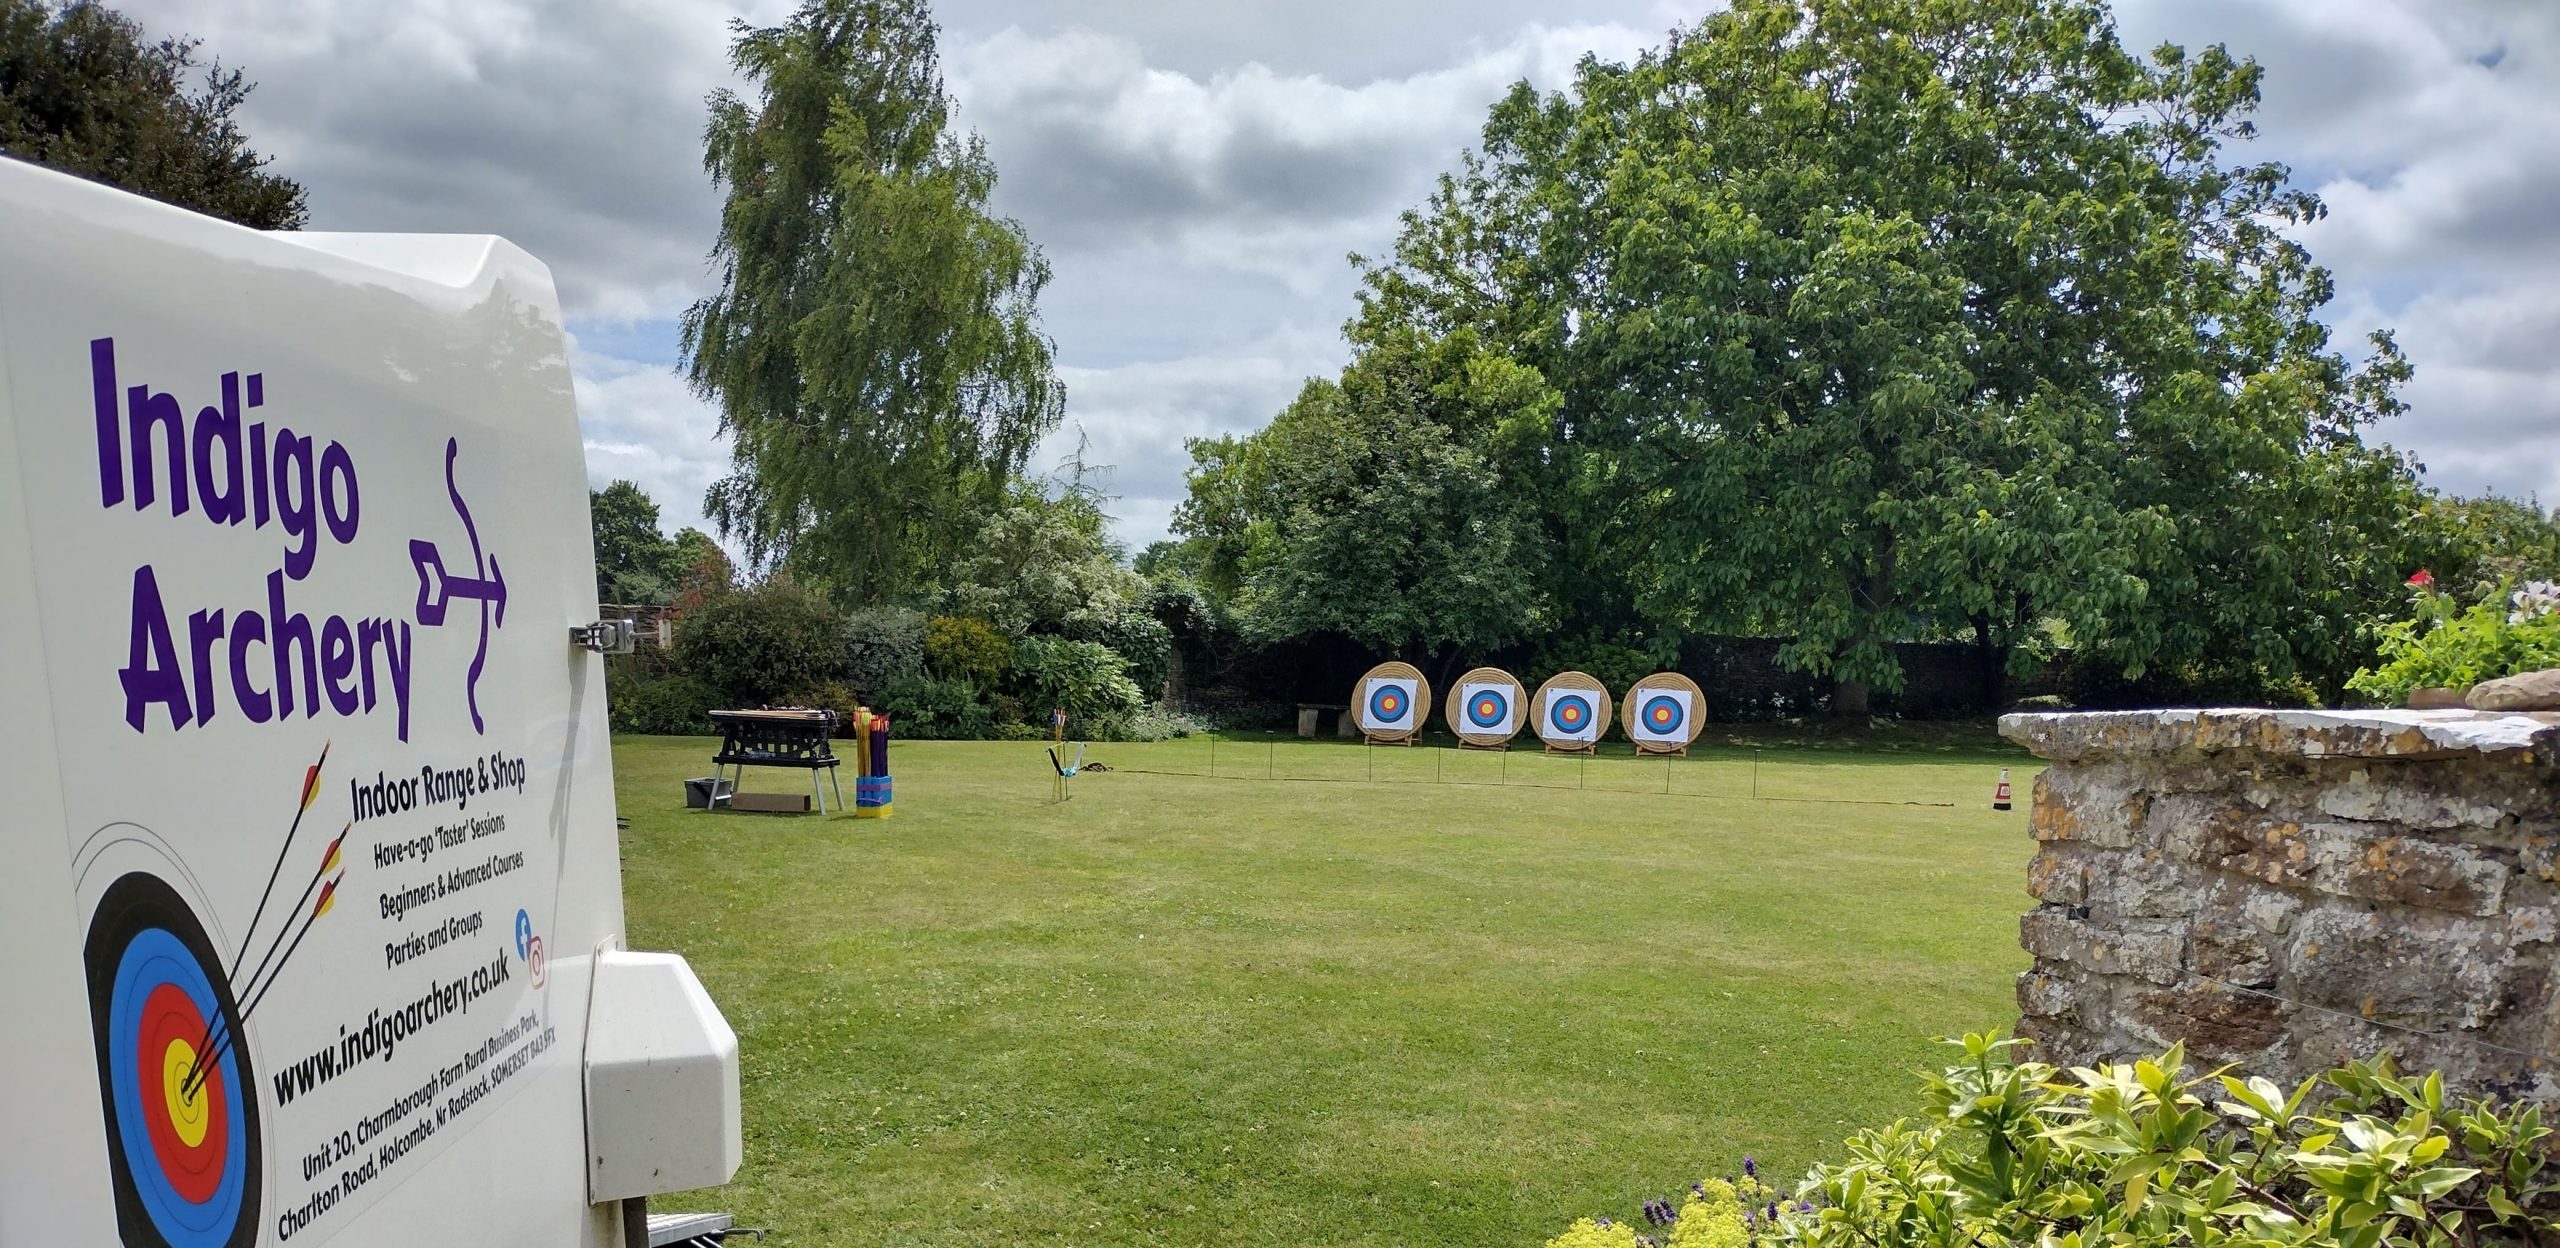 Archery on the Lawn